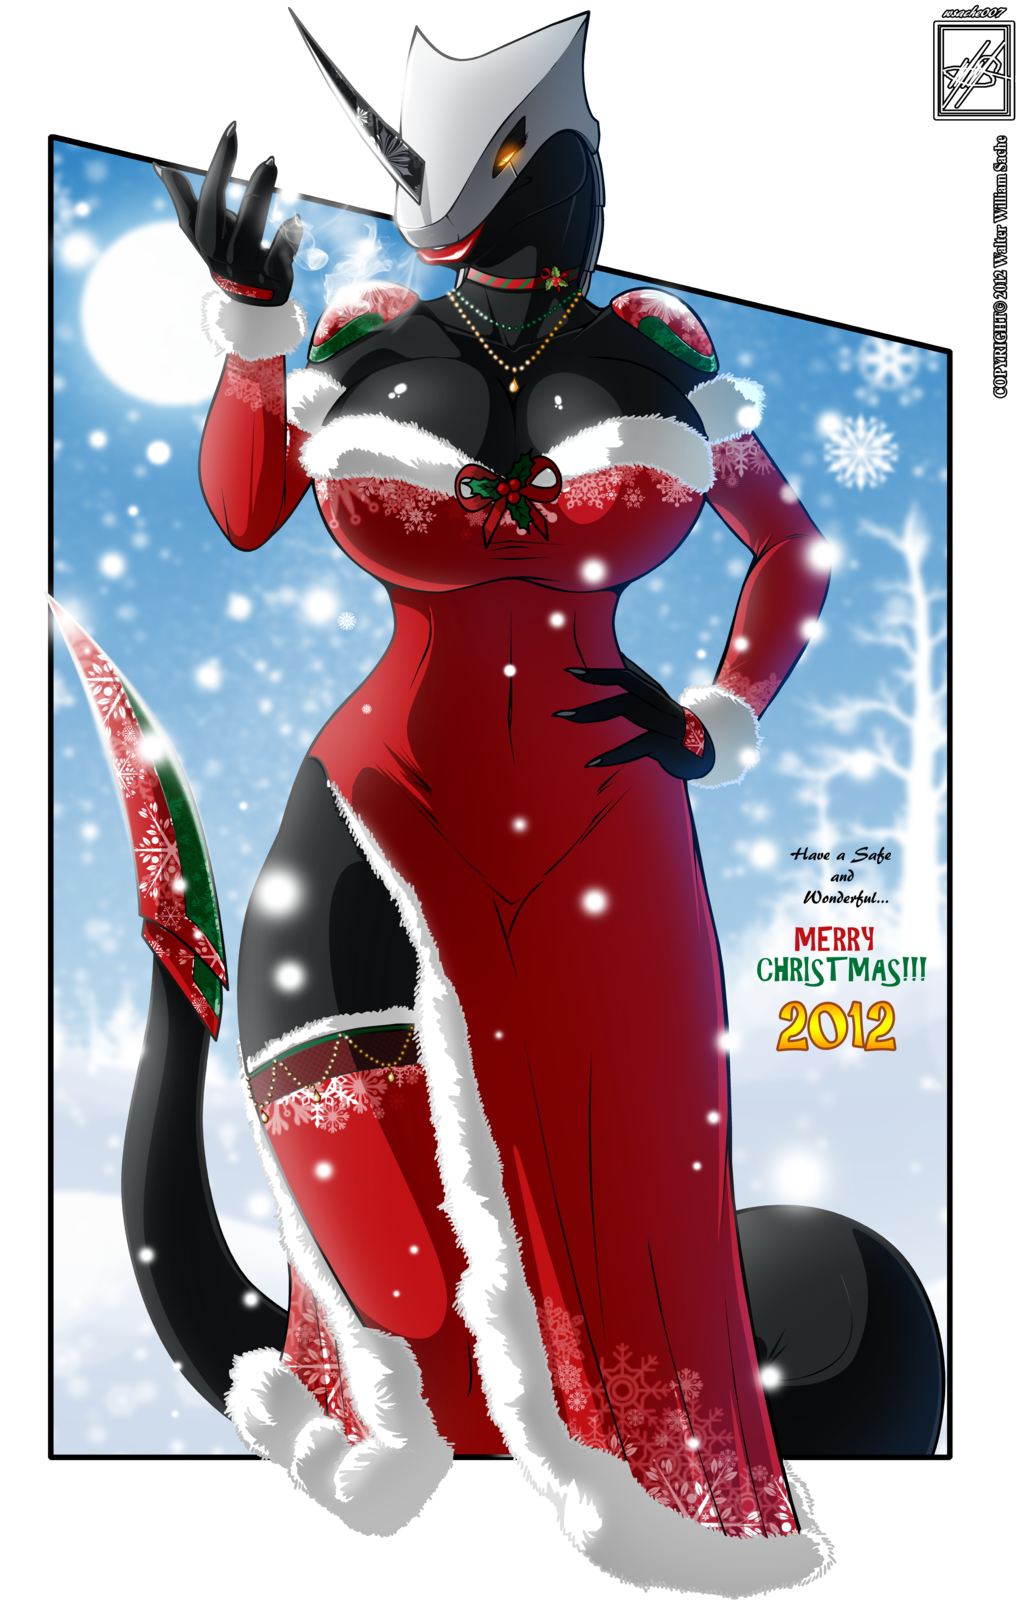 merry_christmas_to_all_from_angel_45_with_love_by_wsache007-d5p8w14.png.